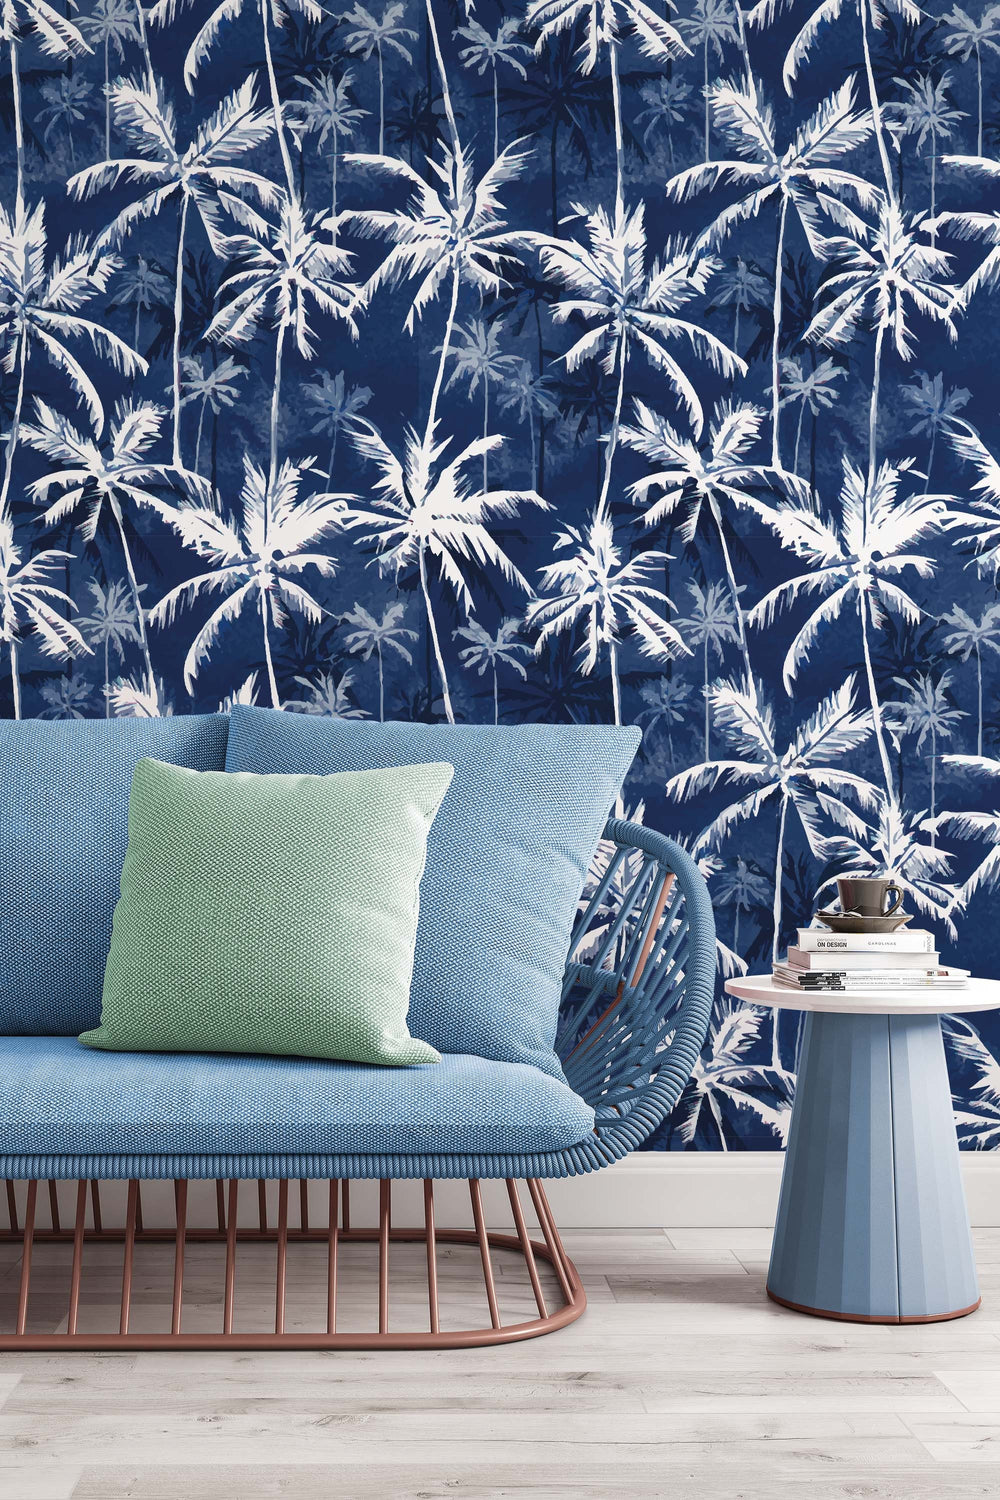 Palms on deep blue background wallpaper - Peel & Stick Wallpaper - Removable Self Adhesive and Traditional wallpaper #3293